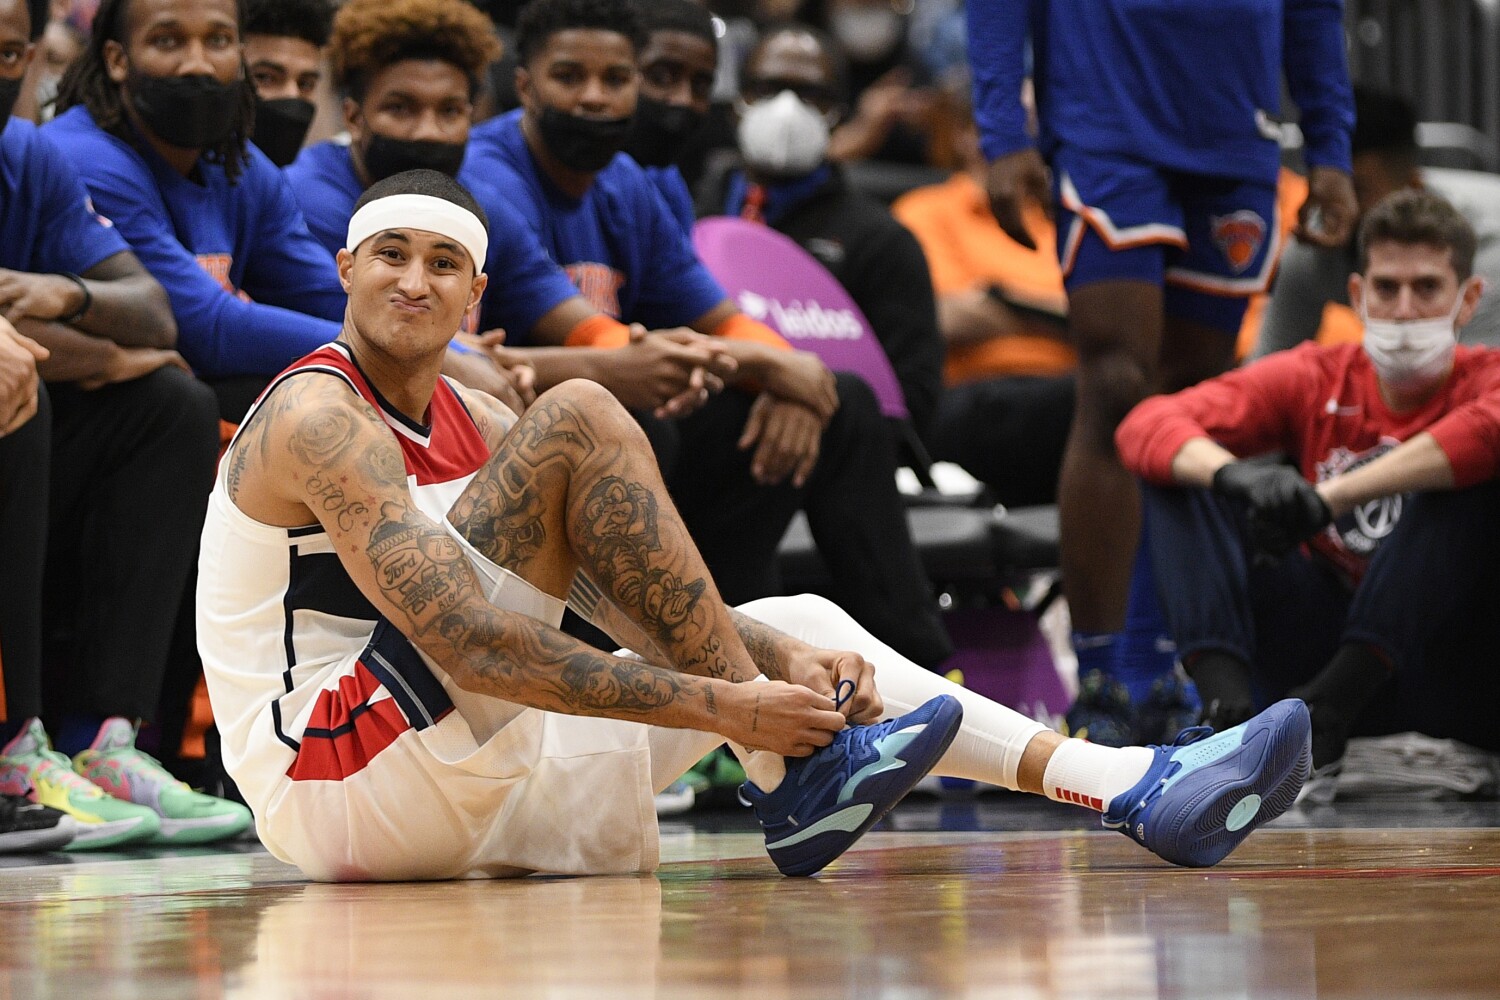 Kyle Kuzma closed the Hecklers and their talks about LeBron James